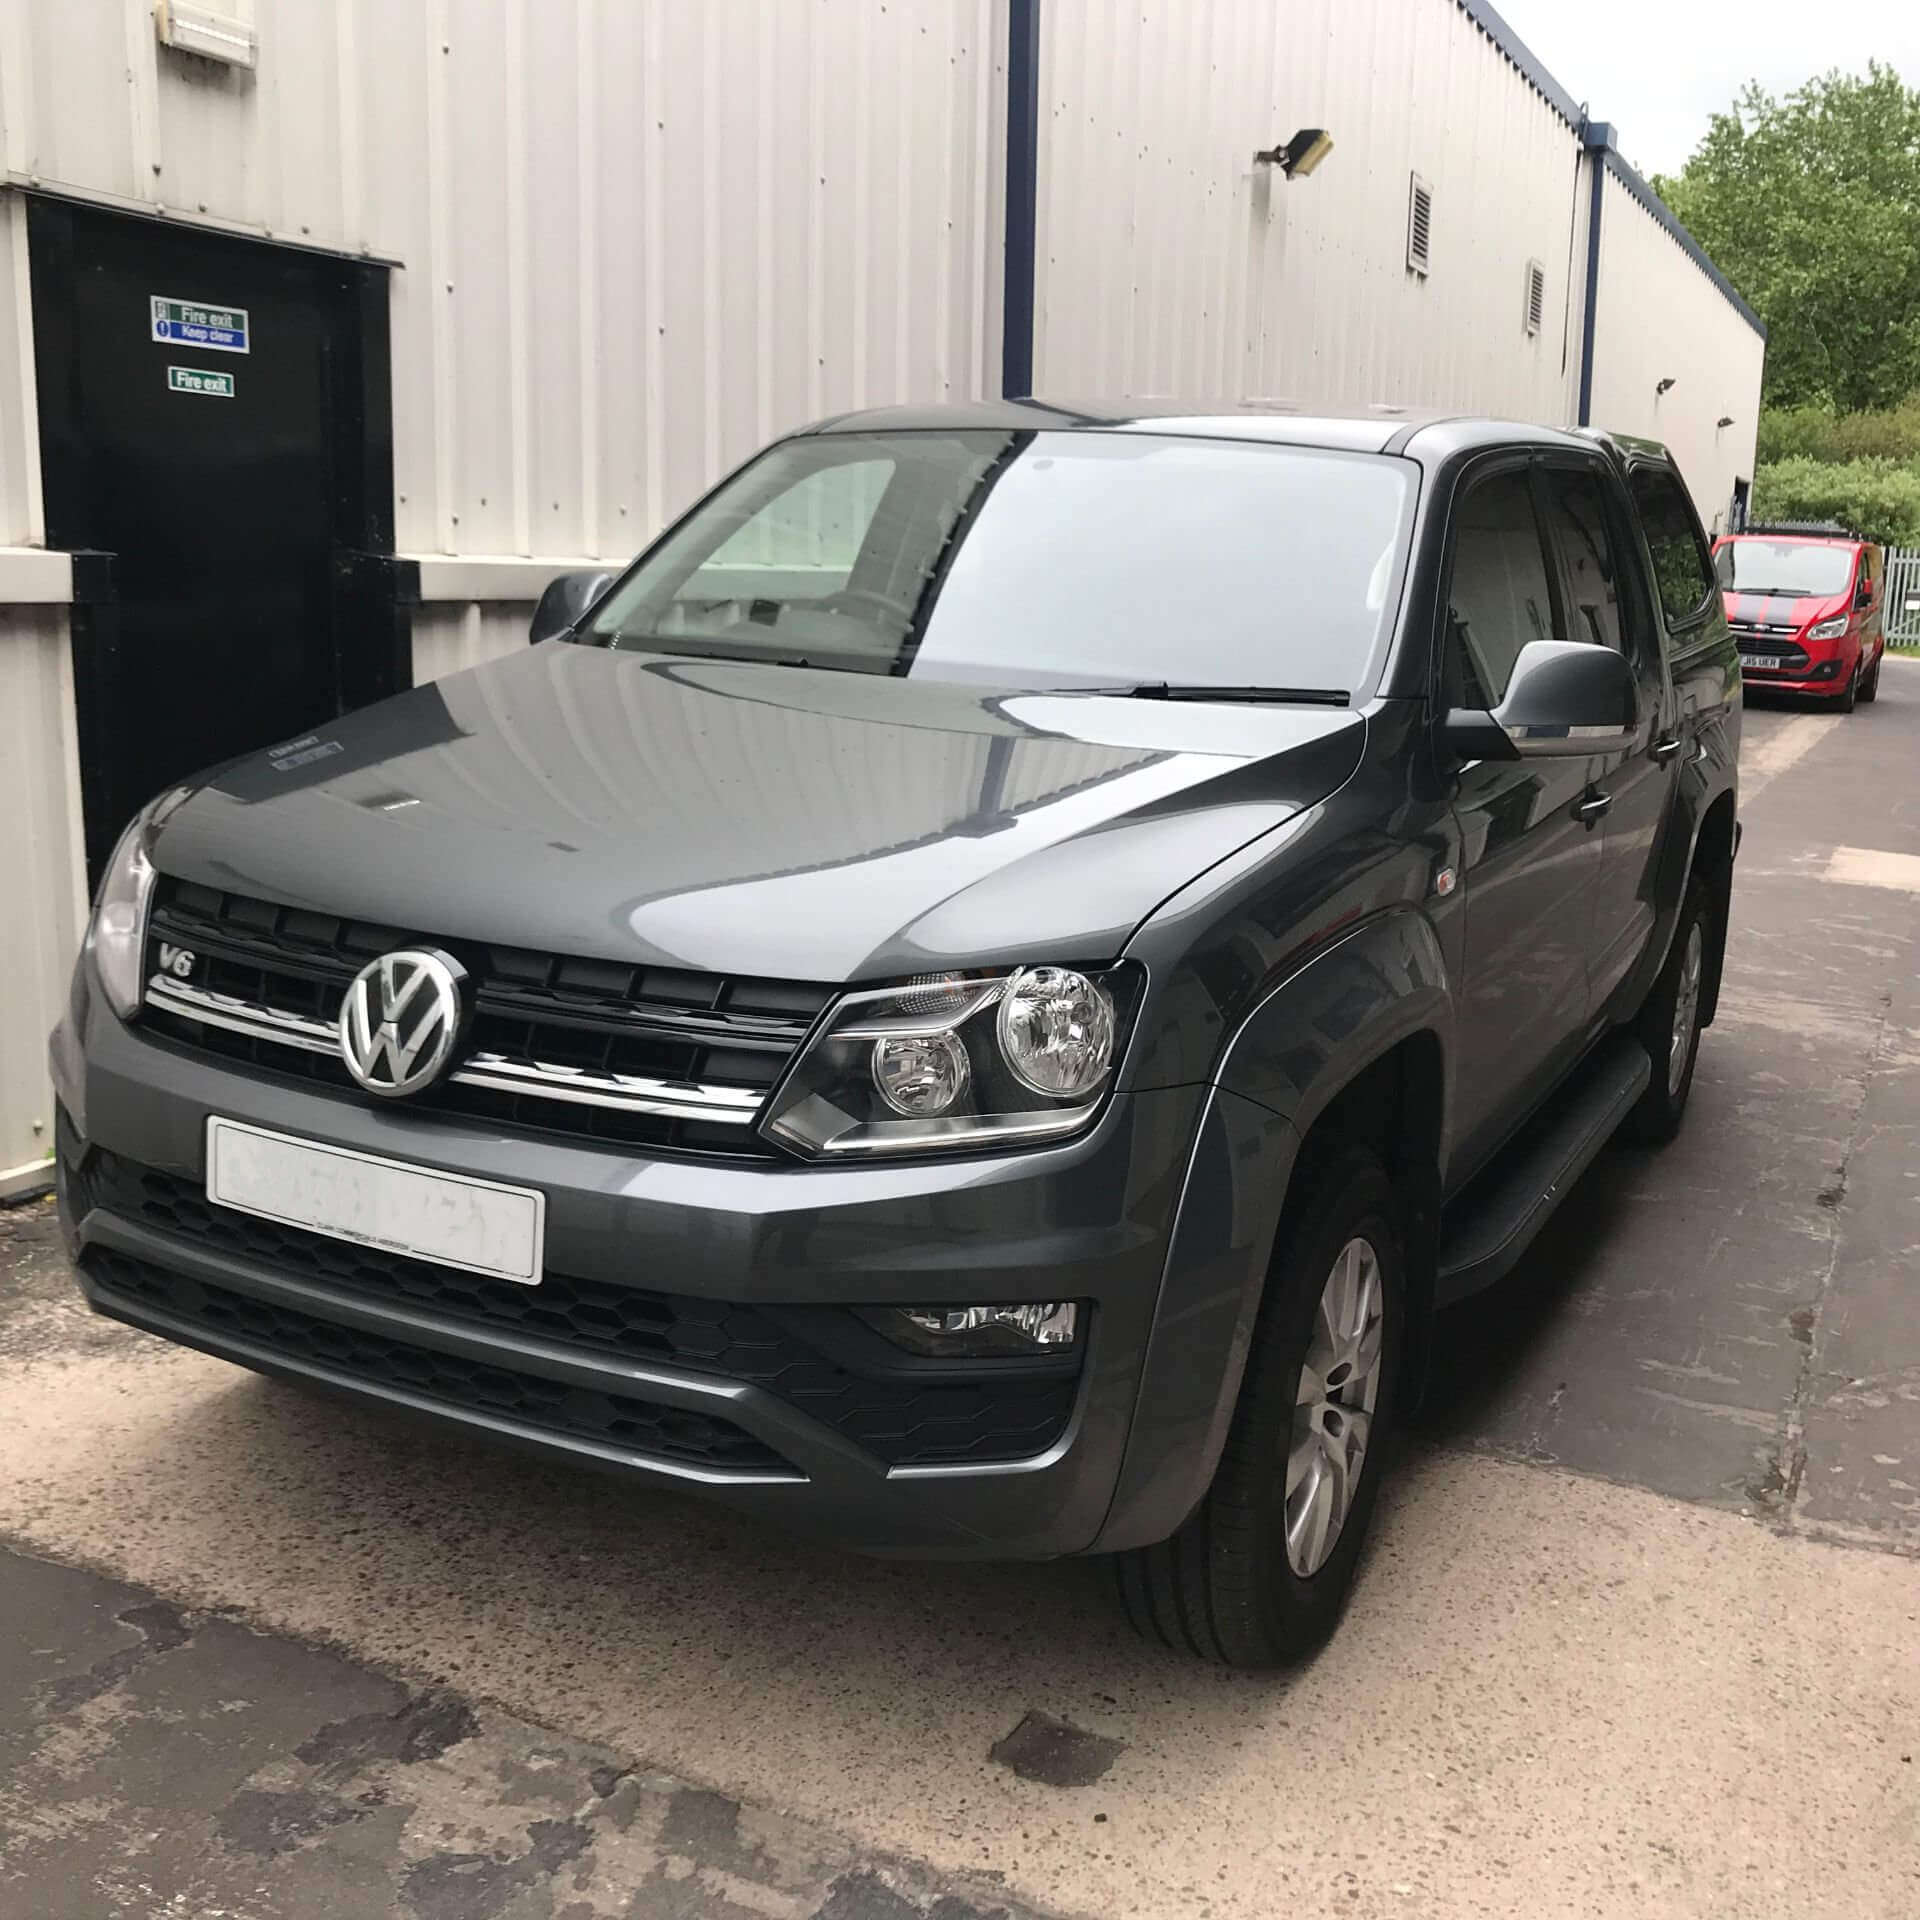 Direct4x4 accessories for Volkswagen Amarok vehicles with a photo of a grey volkswagen amarok in front of a industrial unit